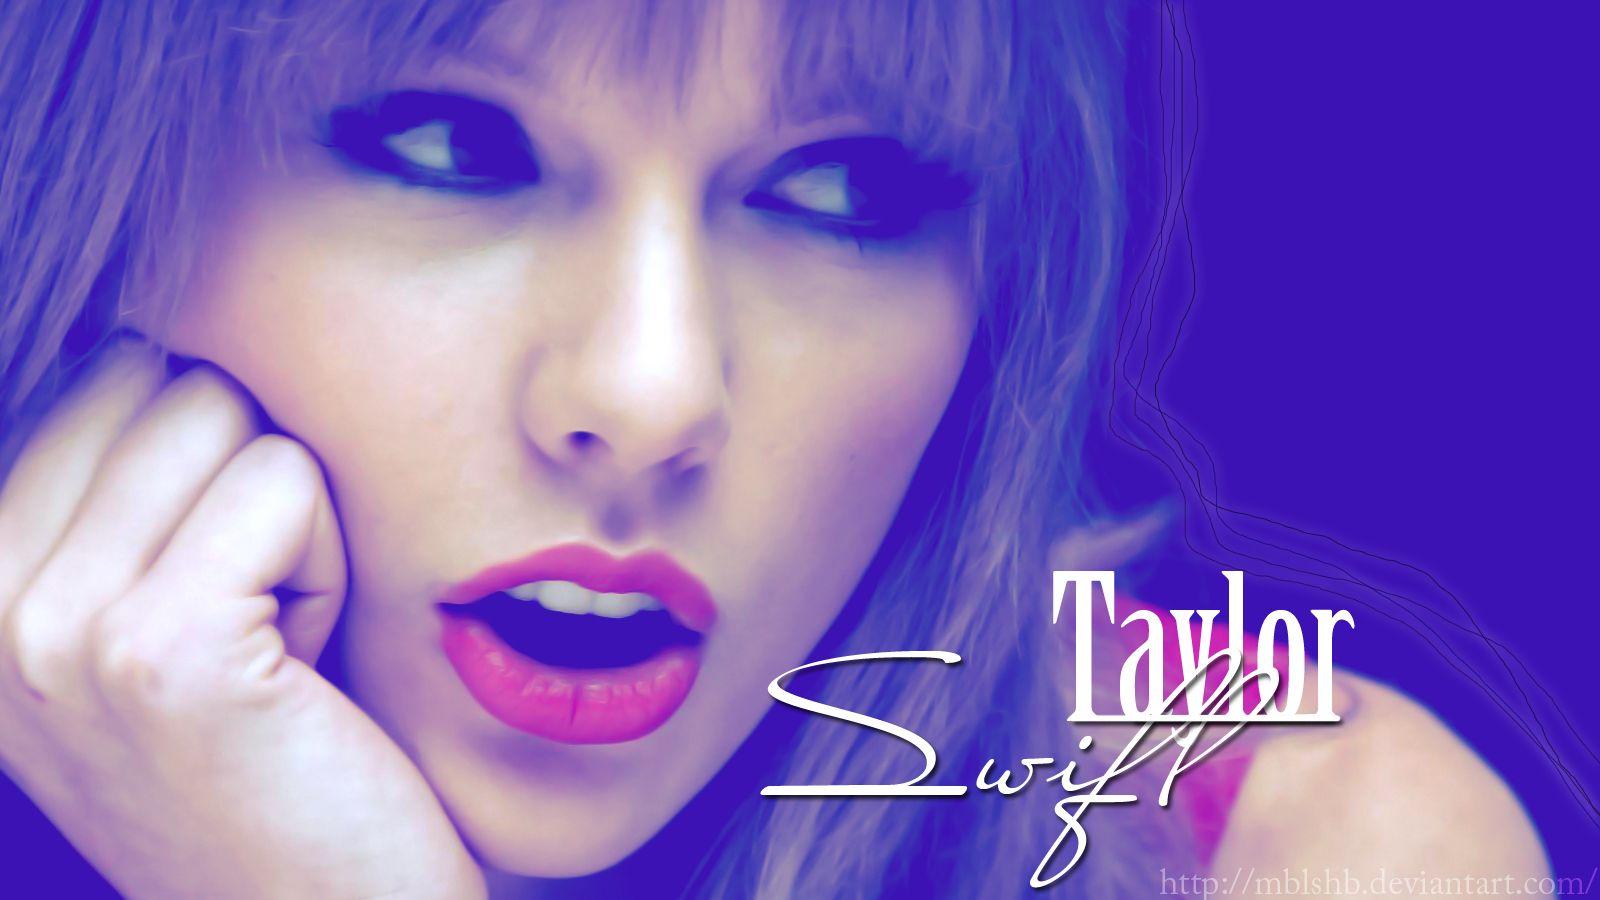 Taylor Swift Background. Taylor swift wallpaper, Taylor